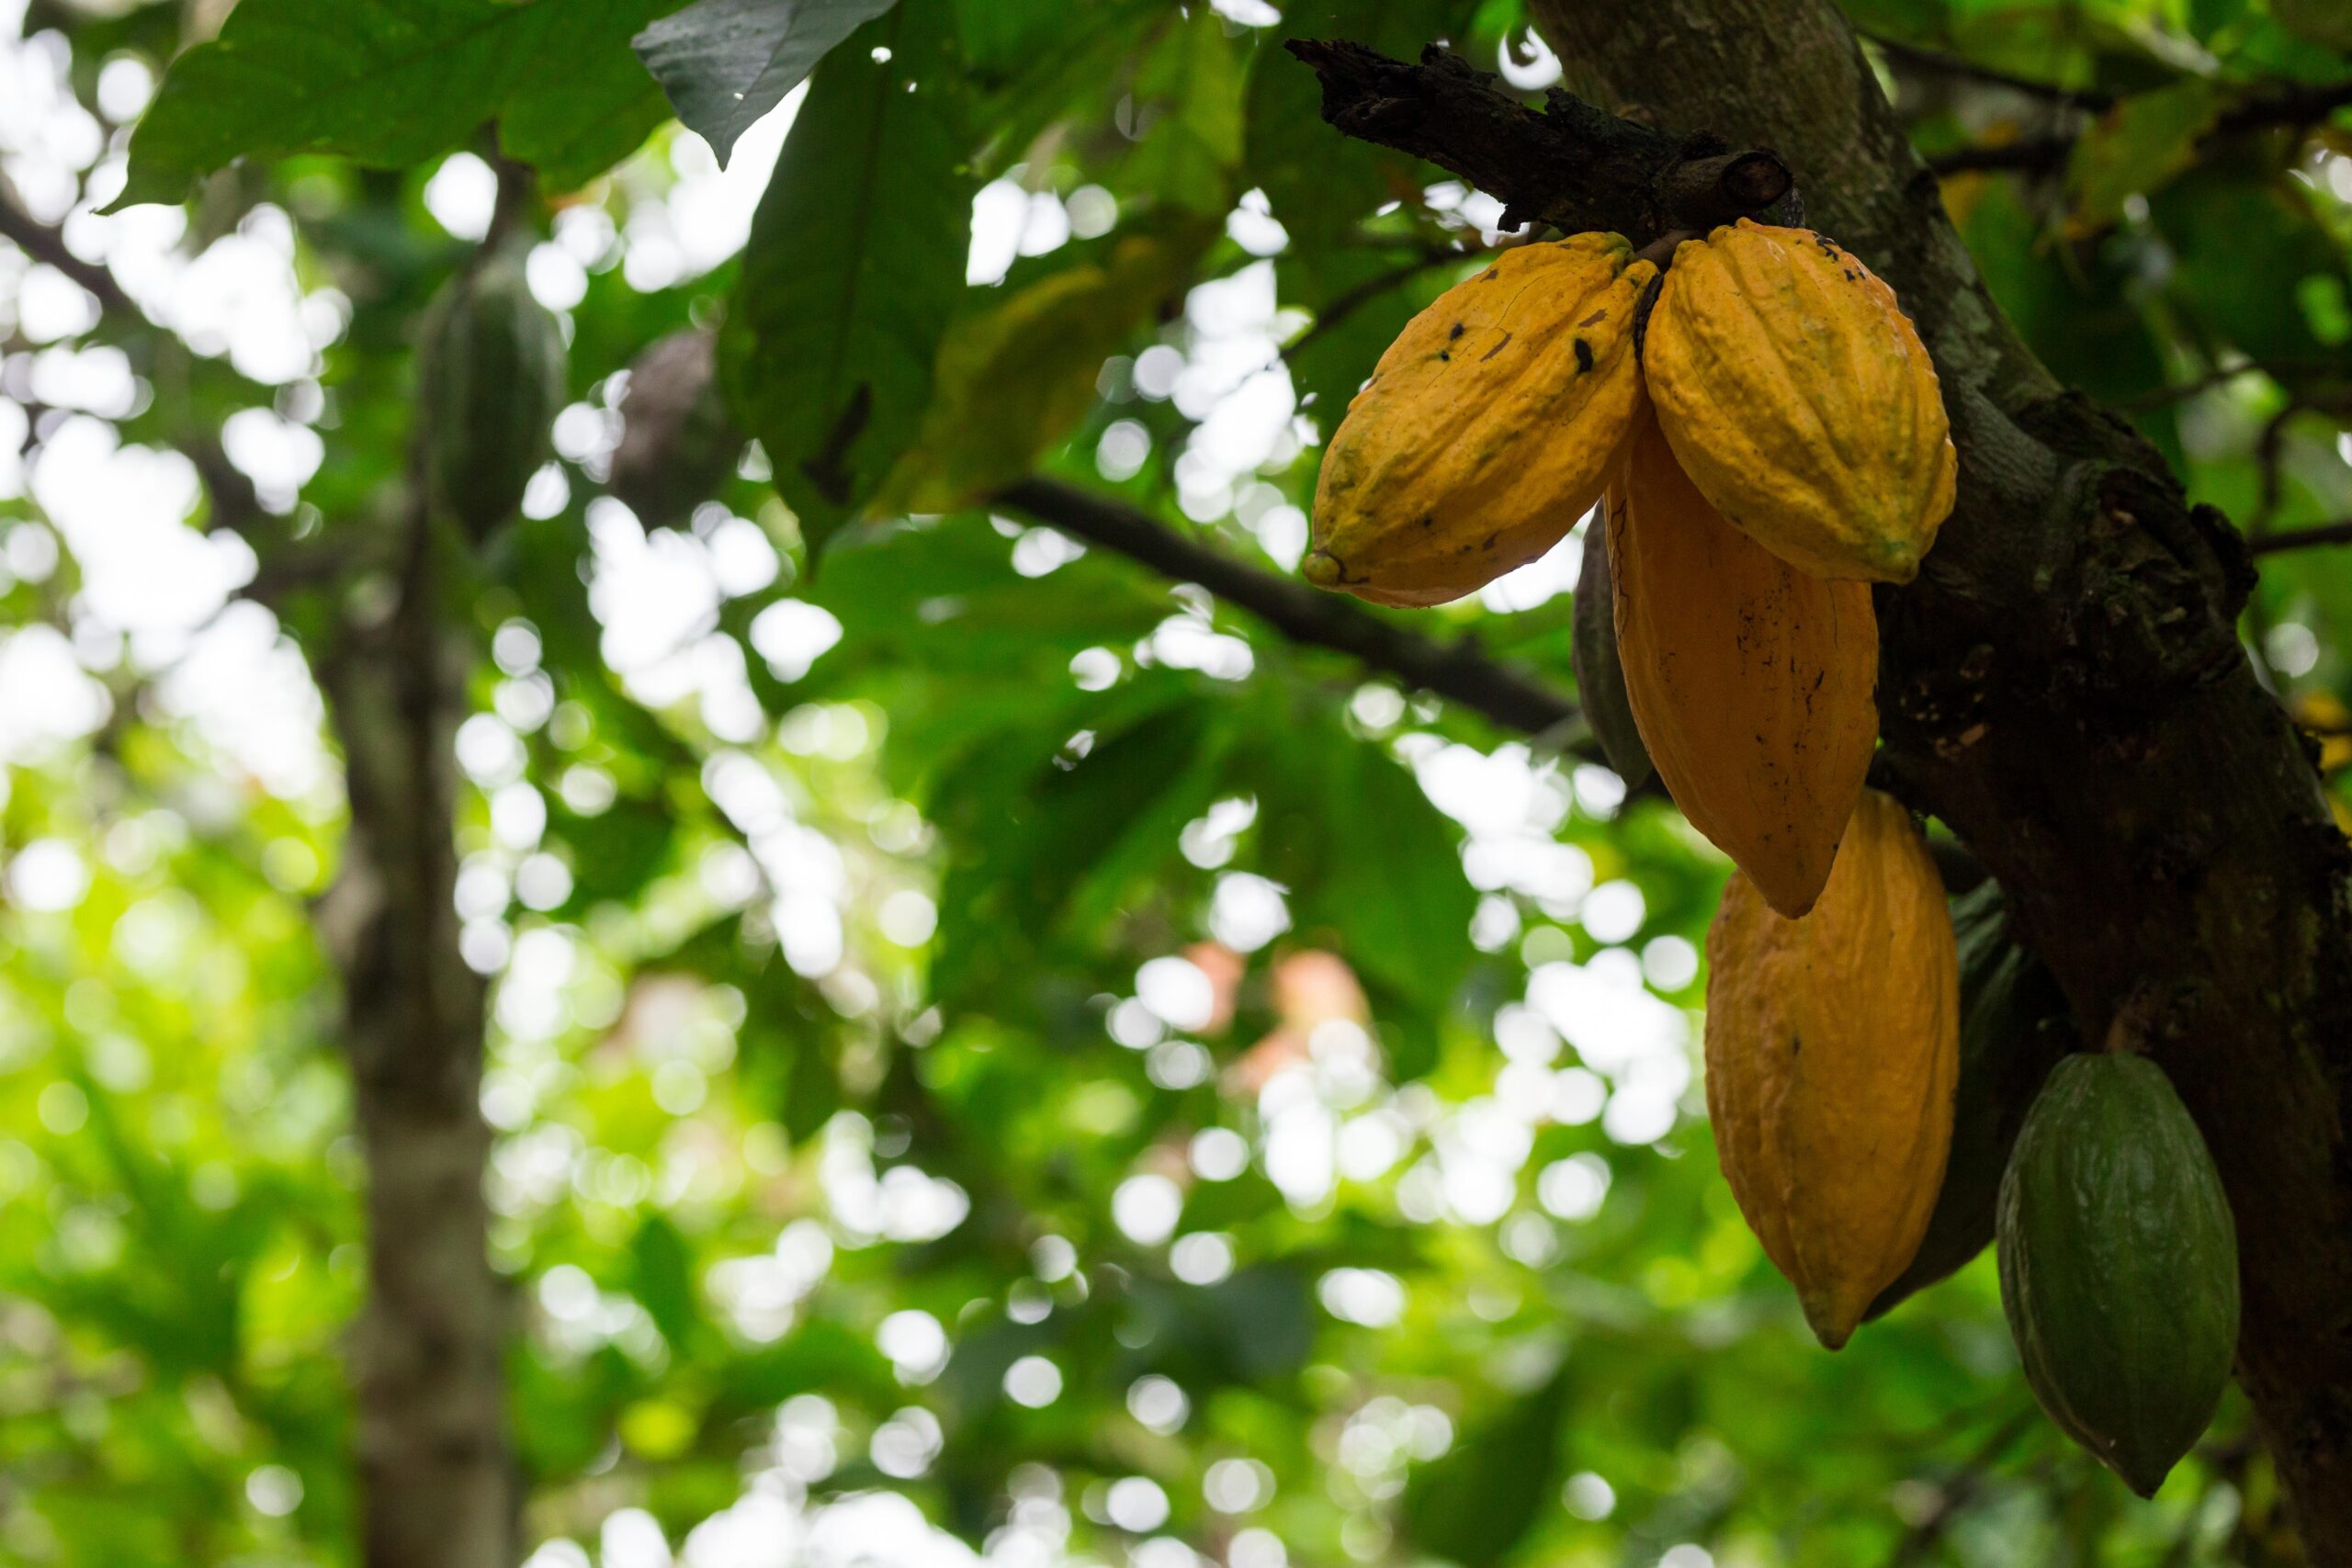 In Fairtrade partnership, Côte d’Ivoire cocoa farmers take key steps towards data ownership, ‘first mile’ traceability